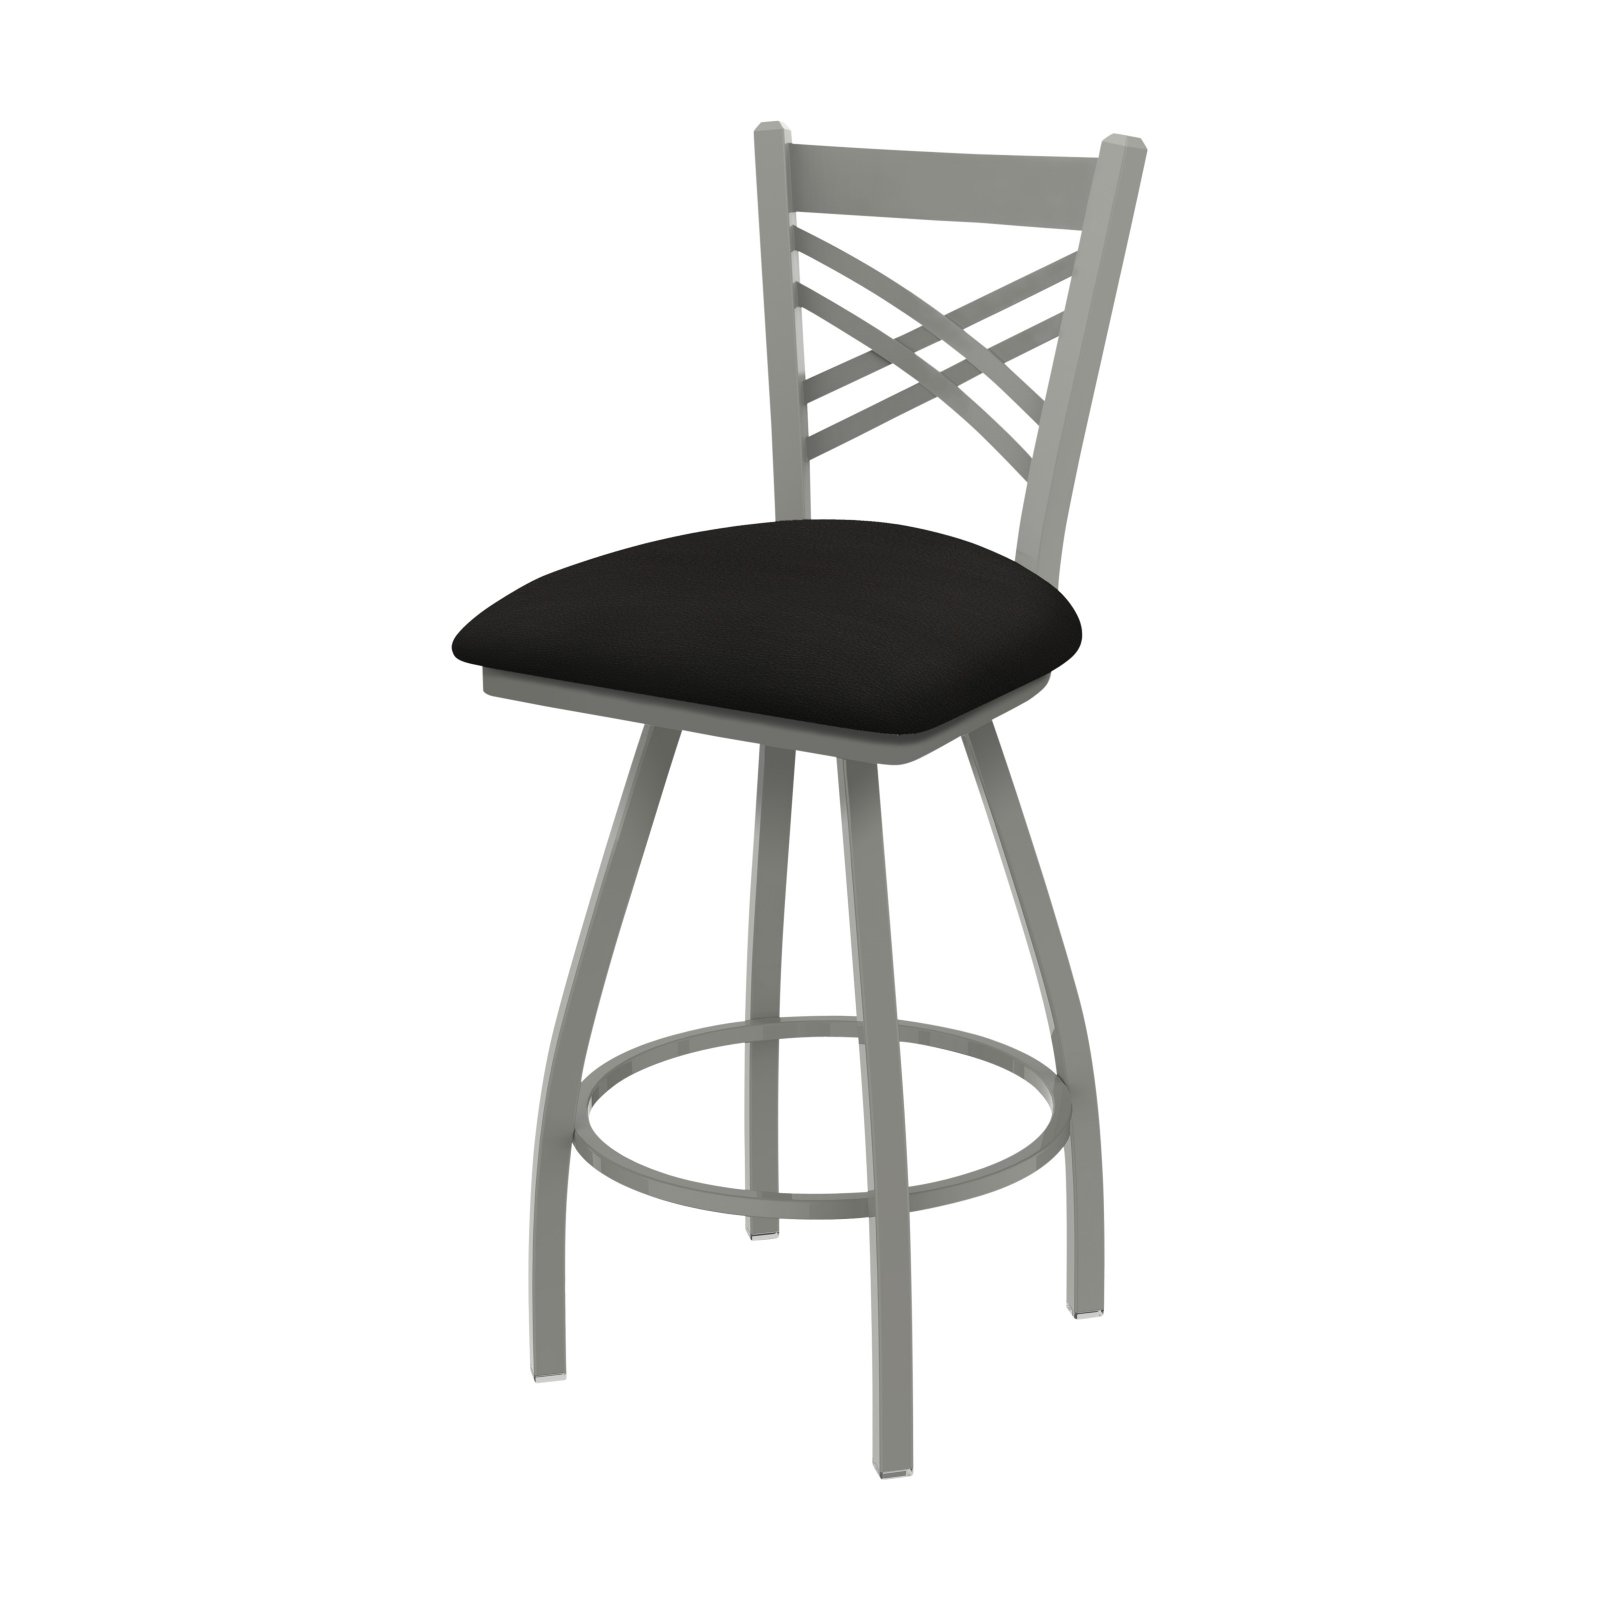 Holland Bar Stool Co XL 820 Catalina 25 in. Faux Leather Swivel Counter Stool - image 2 of 2